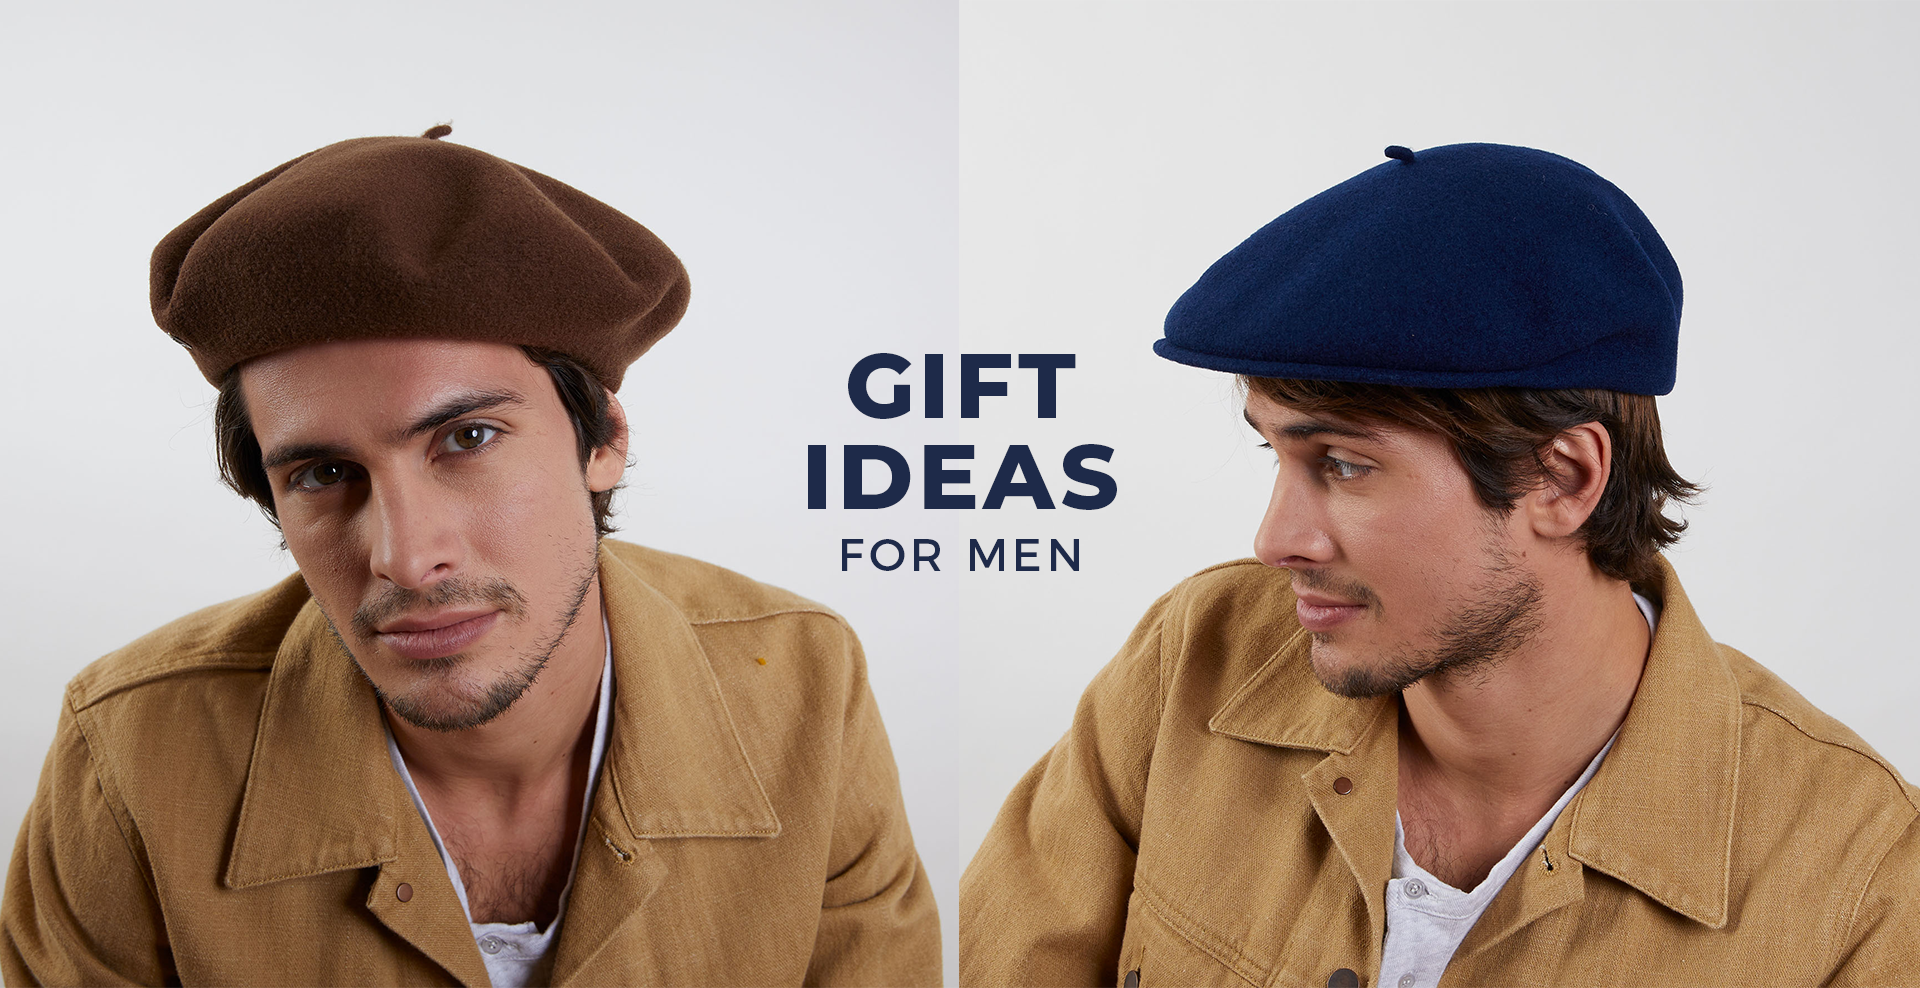 Laulhère: real French beret - for-him